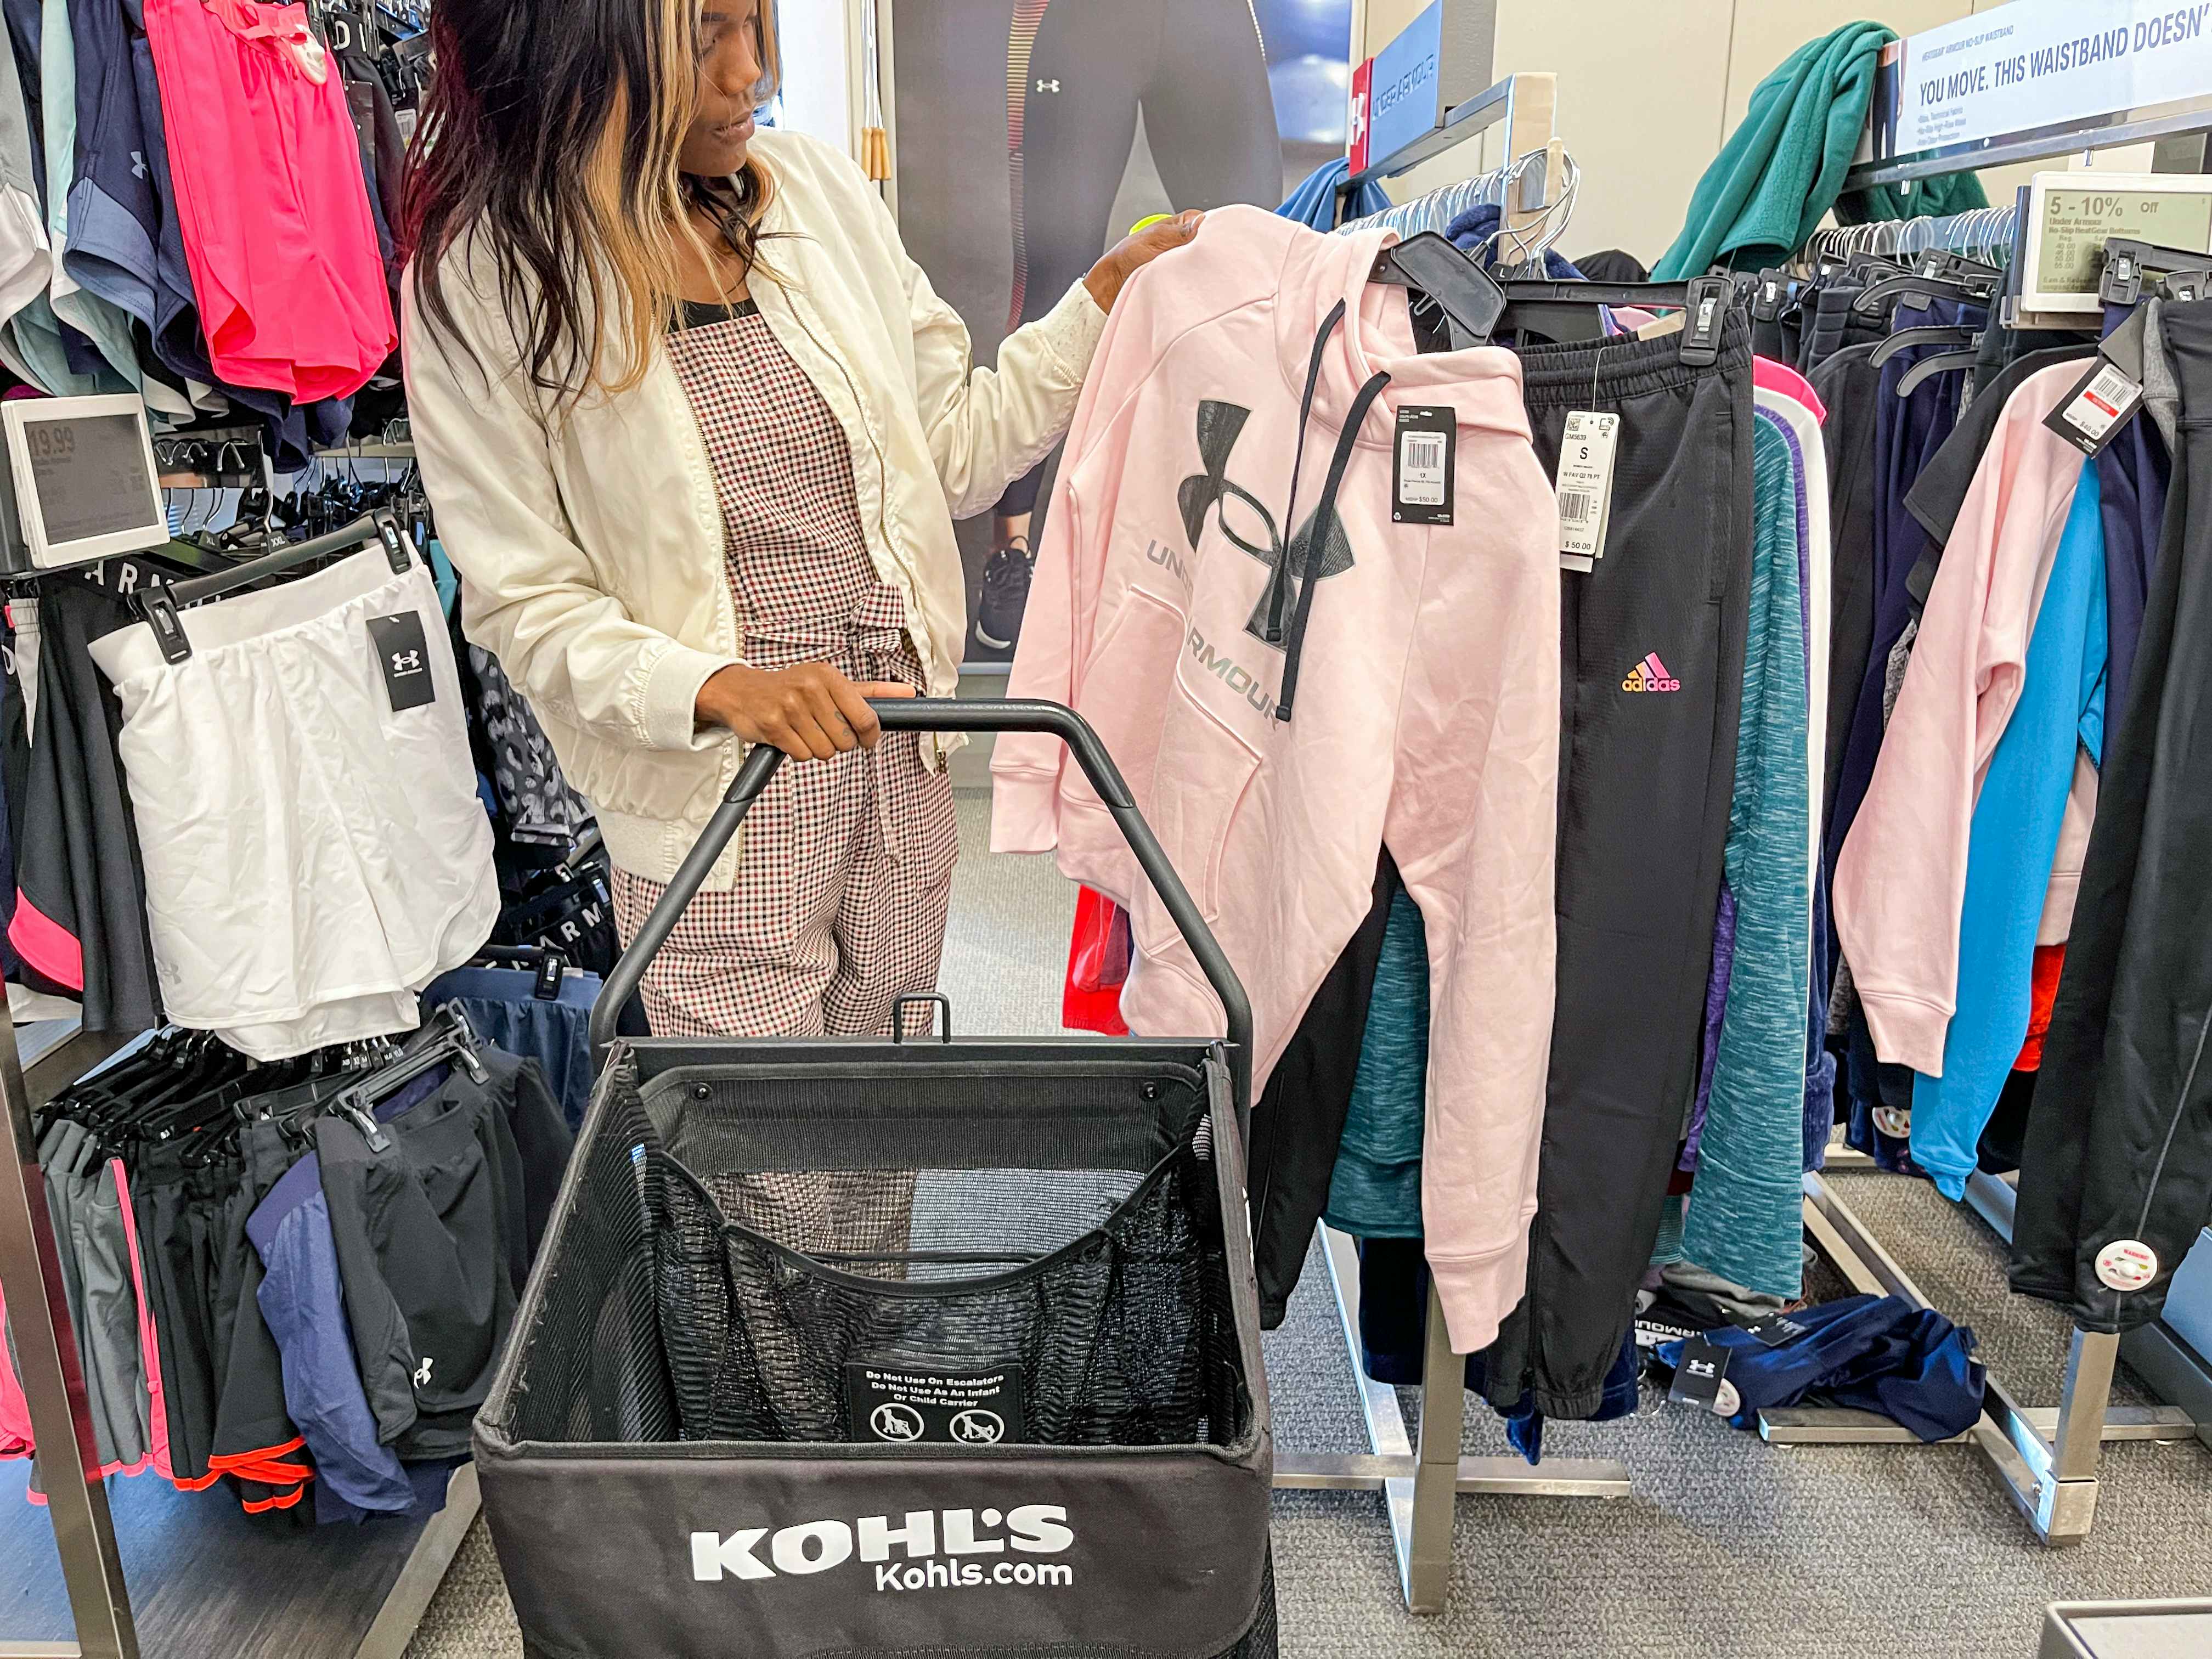 A woman shopping for under armour apparel at Kohls